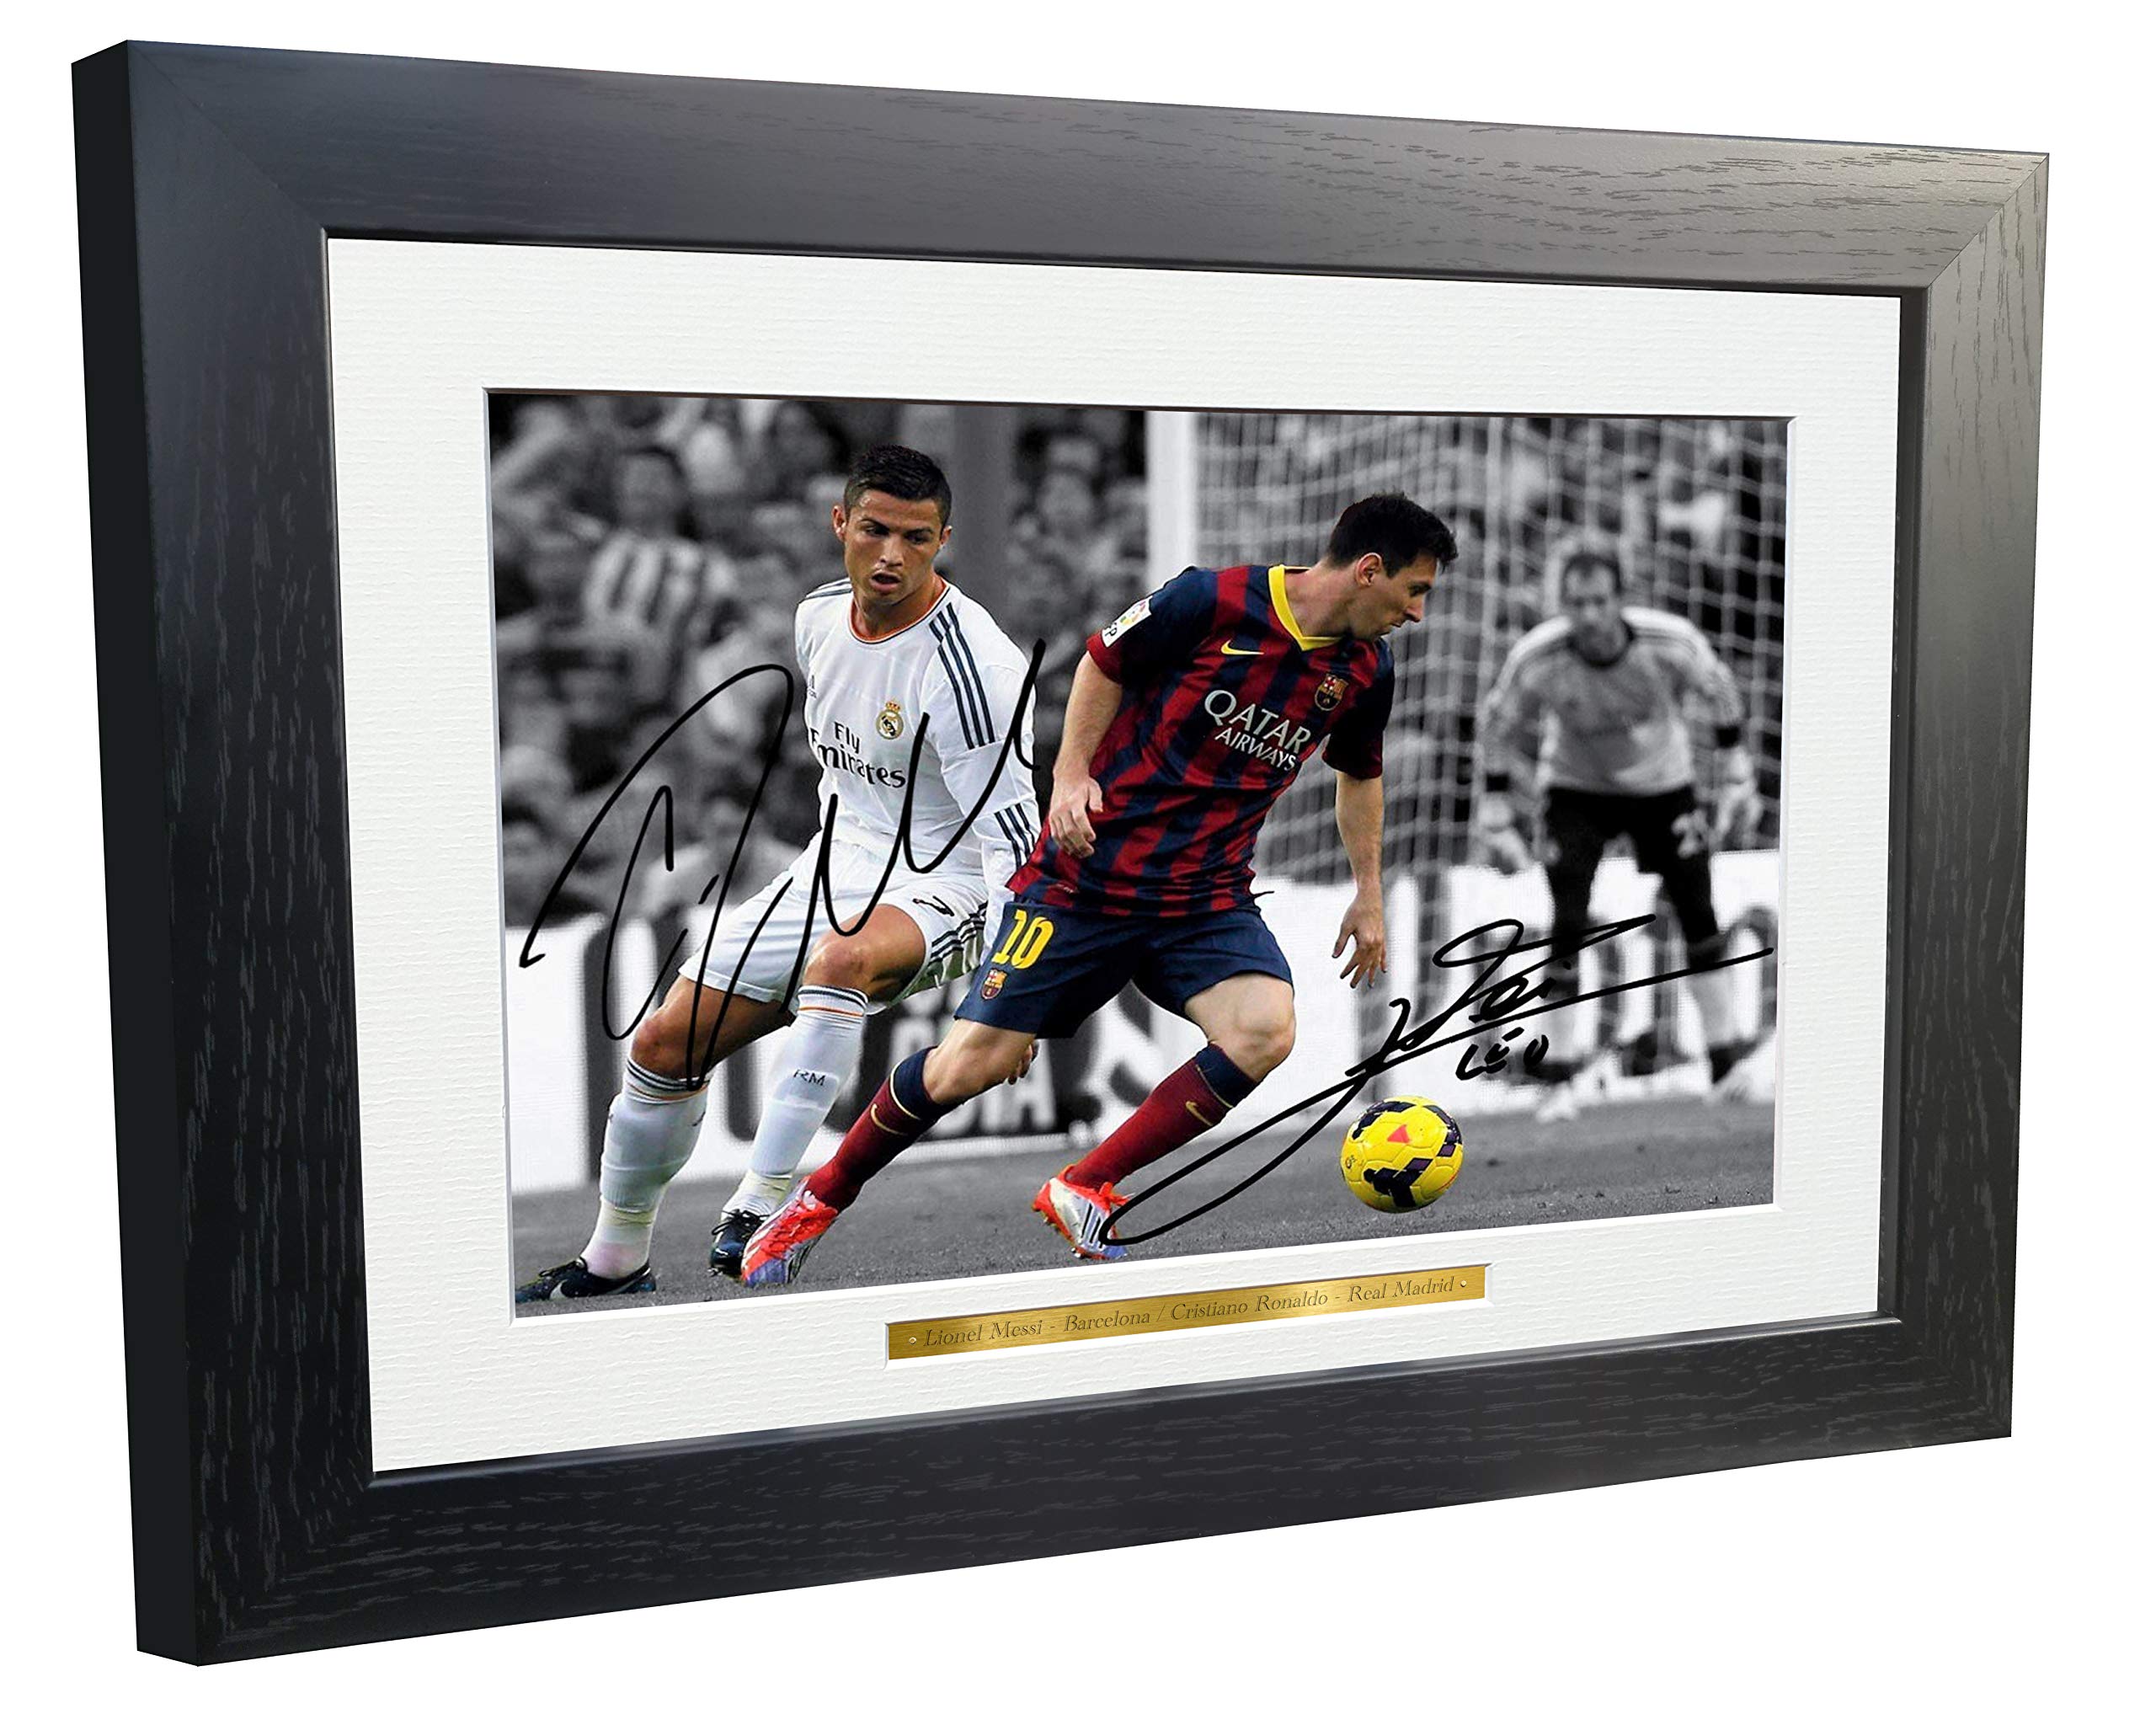 Large A3+ Print Signed Lional Messi Barcelona Cristiano Ronaldo Real Madrid Autographed Photo Photograph Picture Frame Soccer Gift